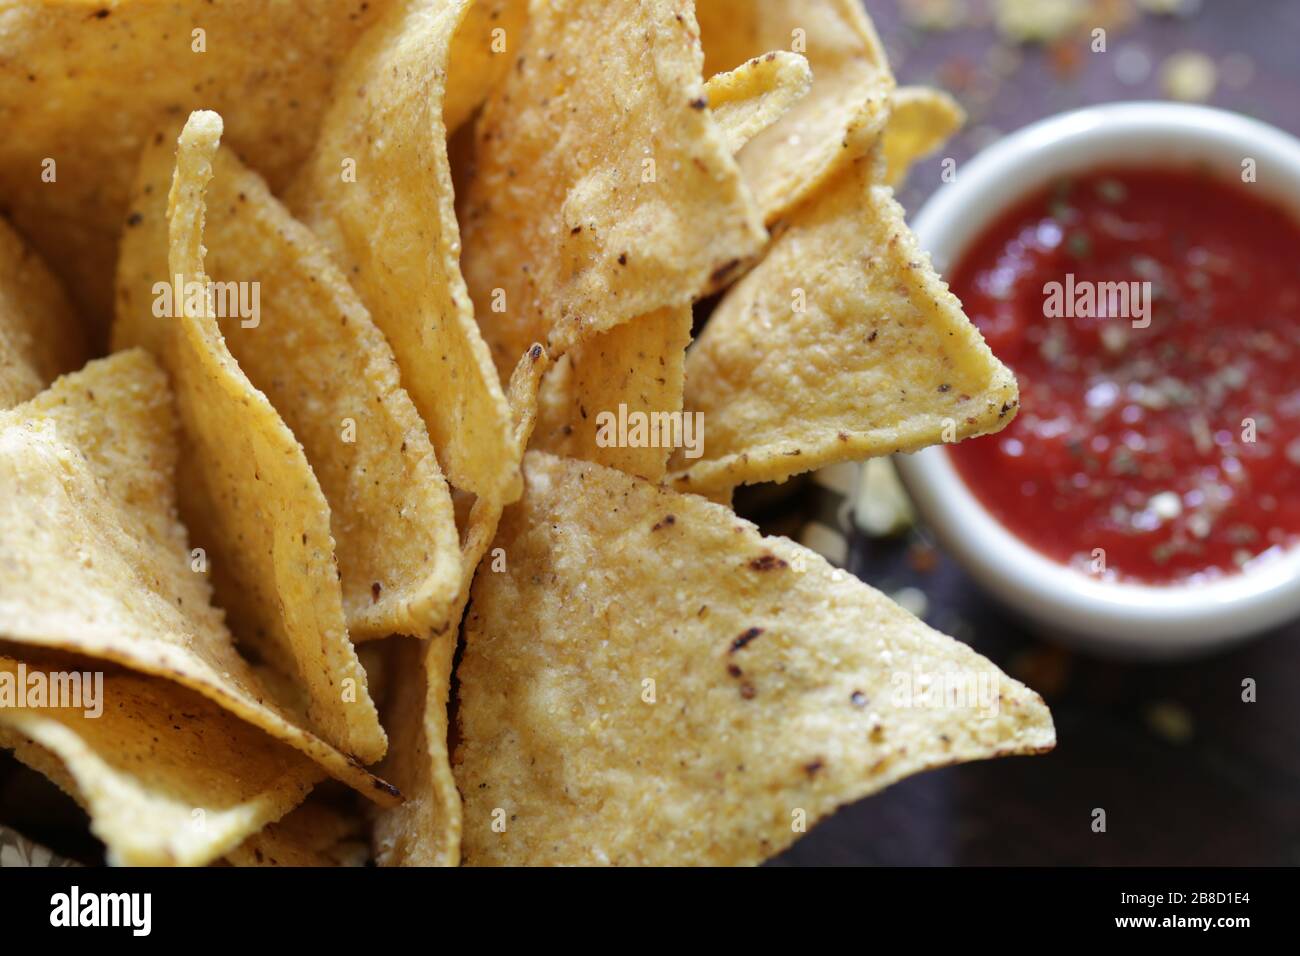 Concept of mexican cuisine. Tortilla chips in a bowl with tomato salsa. Top view. Stock Photo